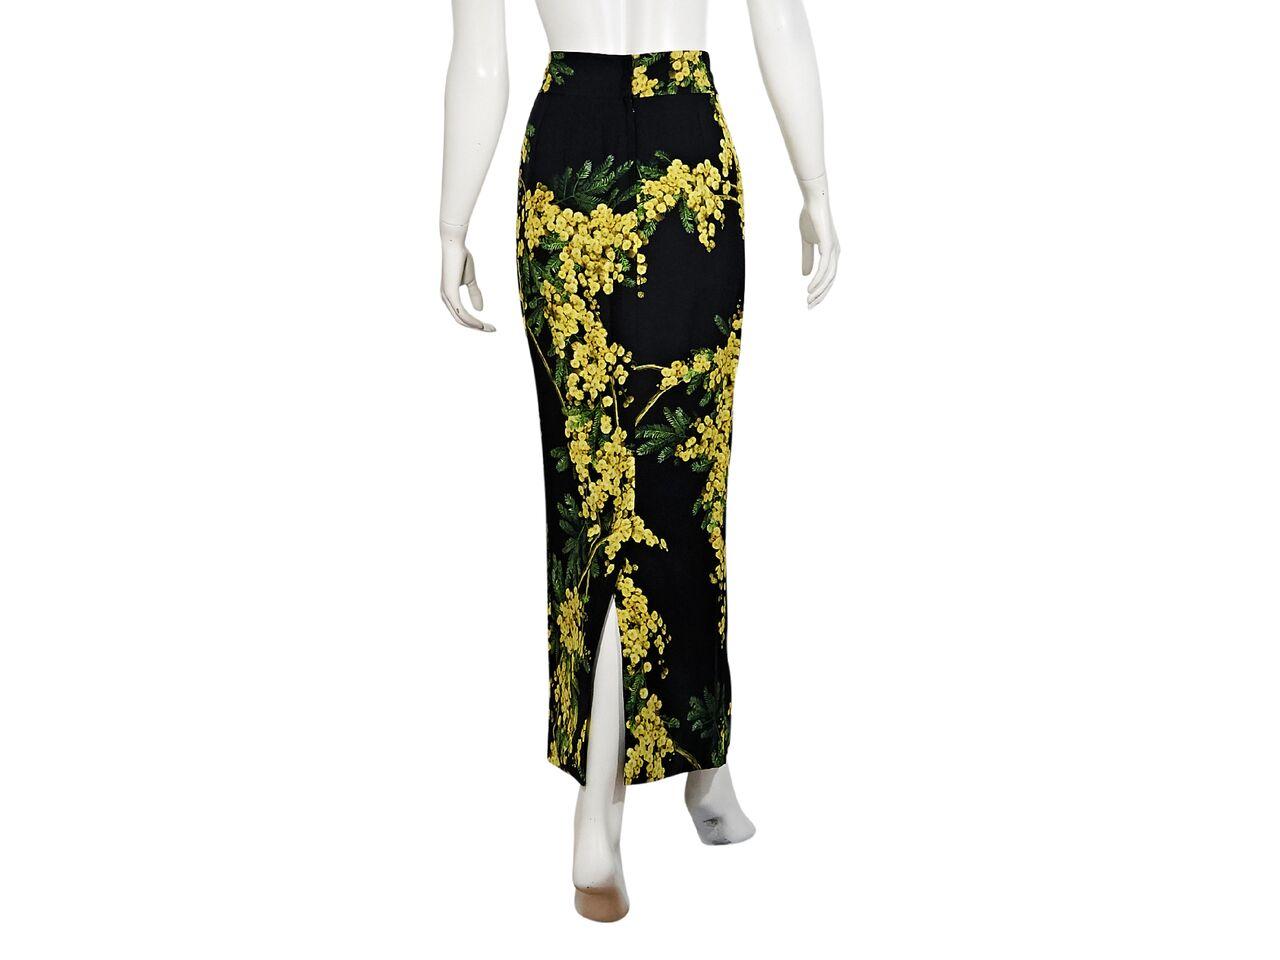 Product details:  Black and yellow floral-printed maxi skirt by Dolce & Gabbana.  Wide banded waist.  Back center hem vent.  31